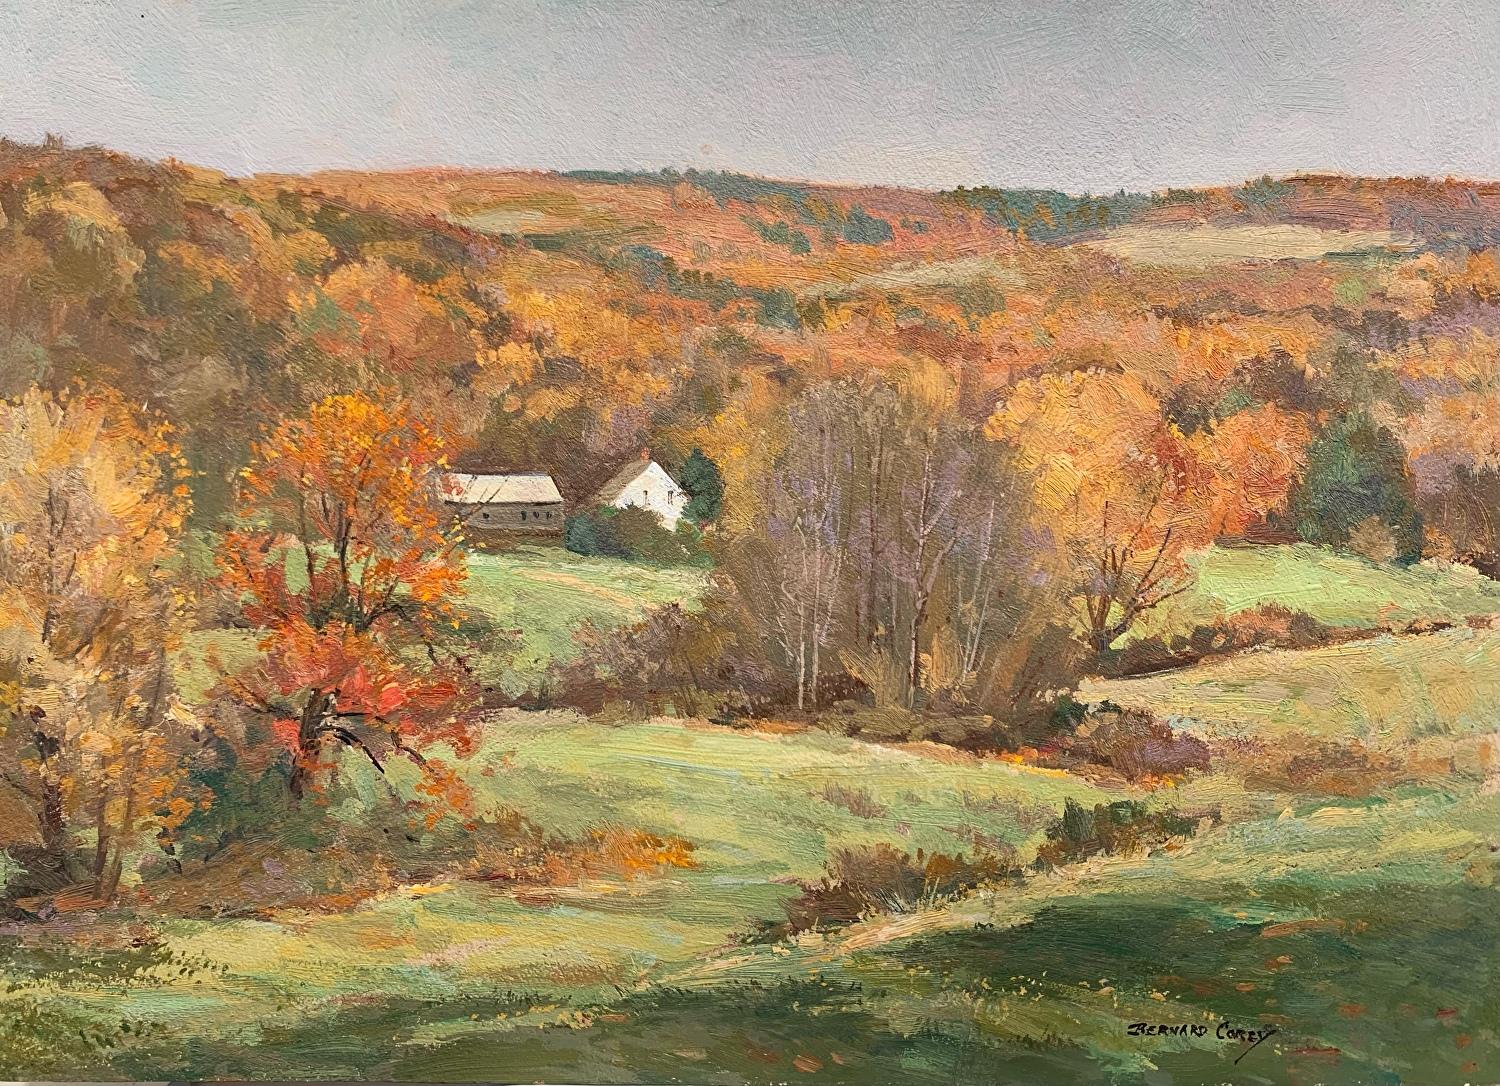 Bernard Corey was a renowned artist from Grafton, Massachusetts, known for his paintings and etchings capturing the beauty of New England. His artworks showcased a mastery of light, color, and composition, creating scenes of tranquility and charm.